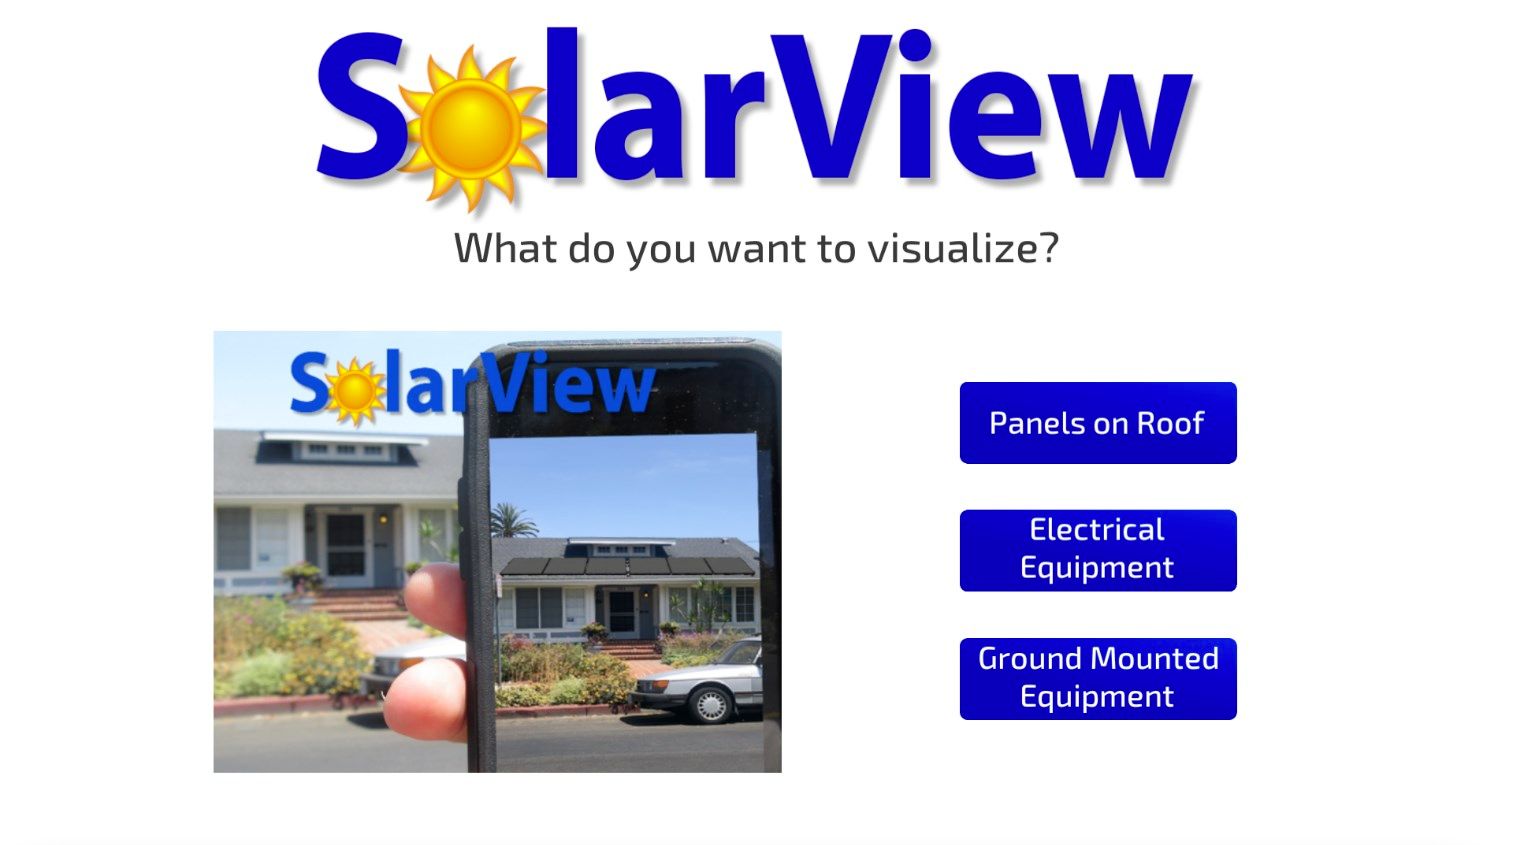 SolarView